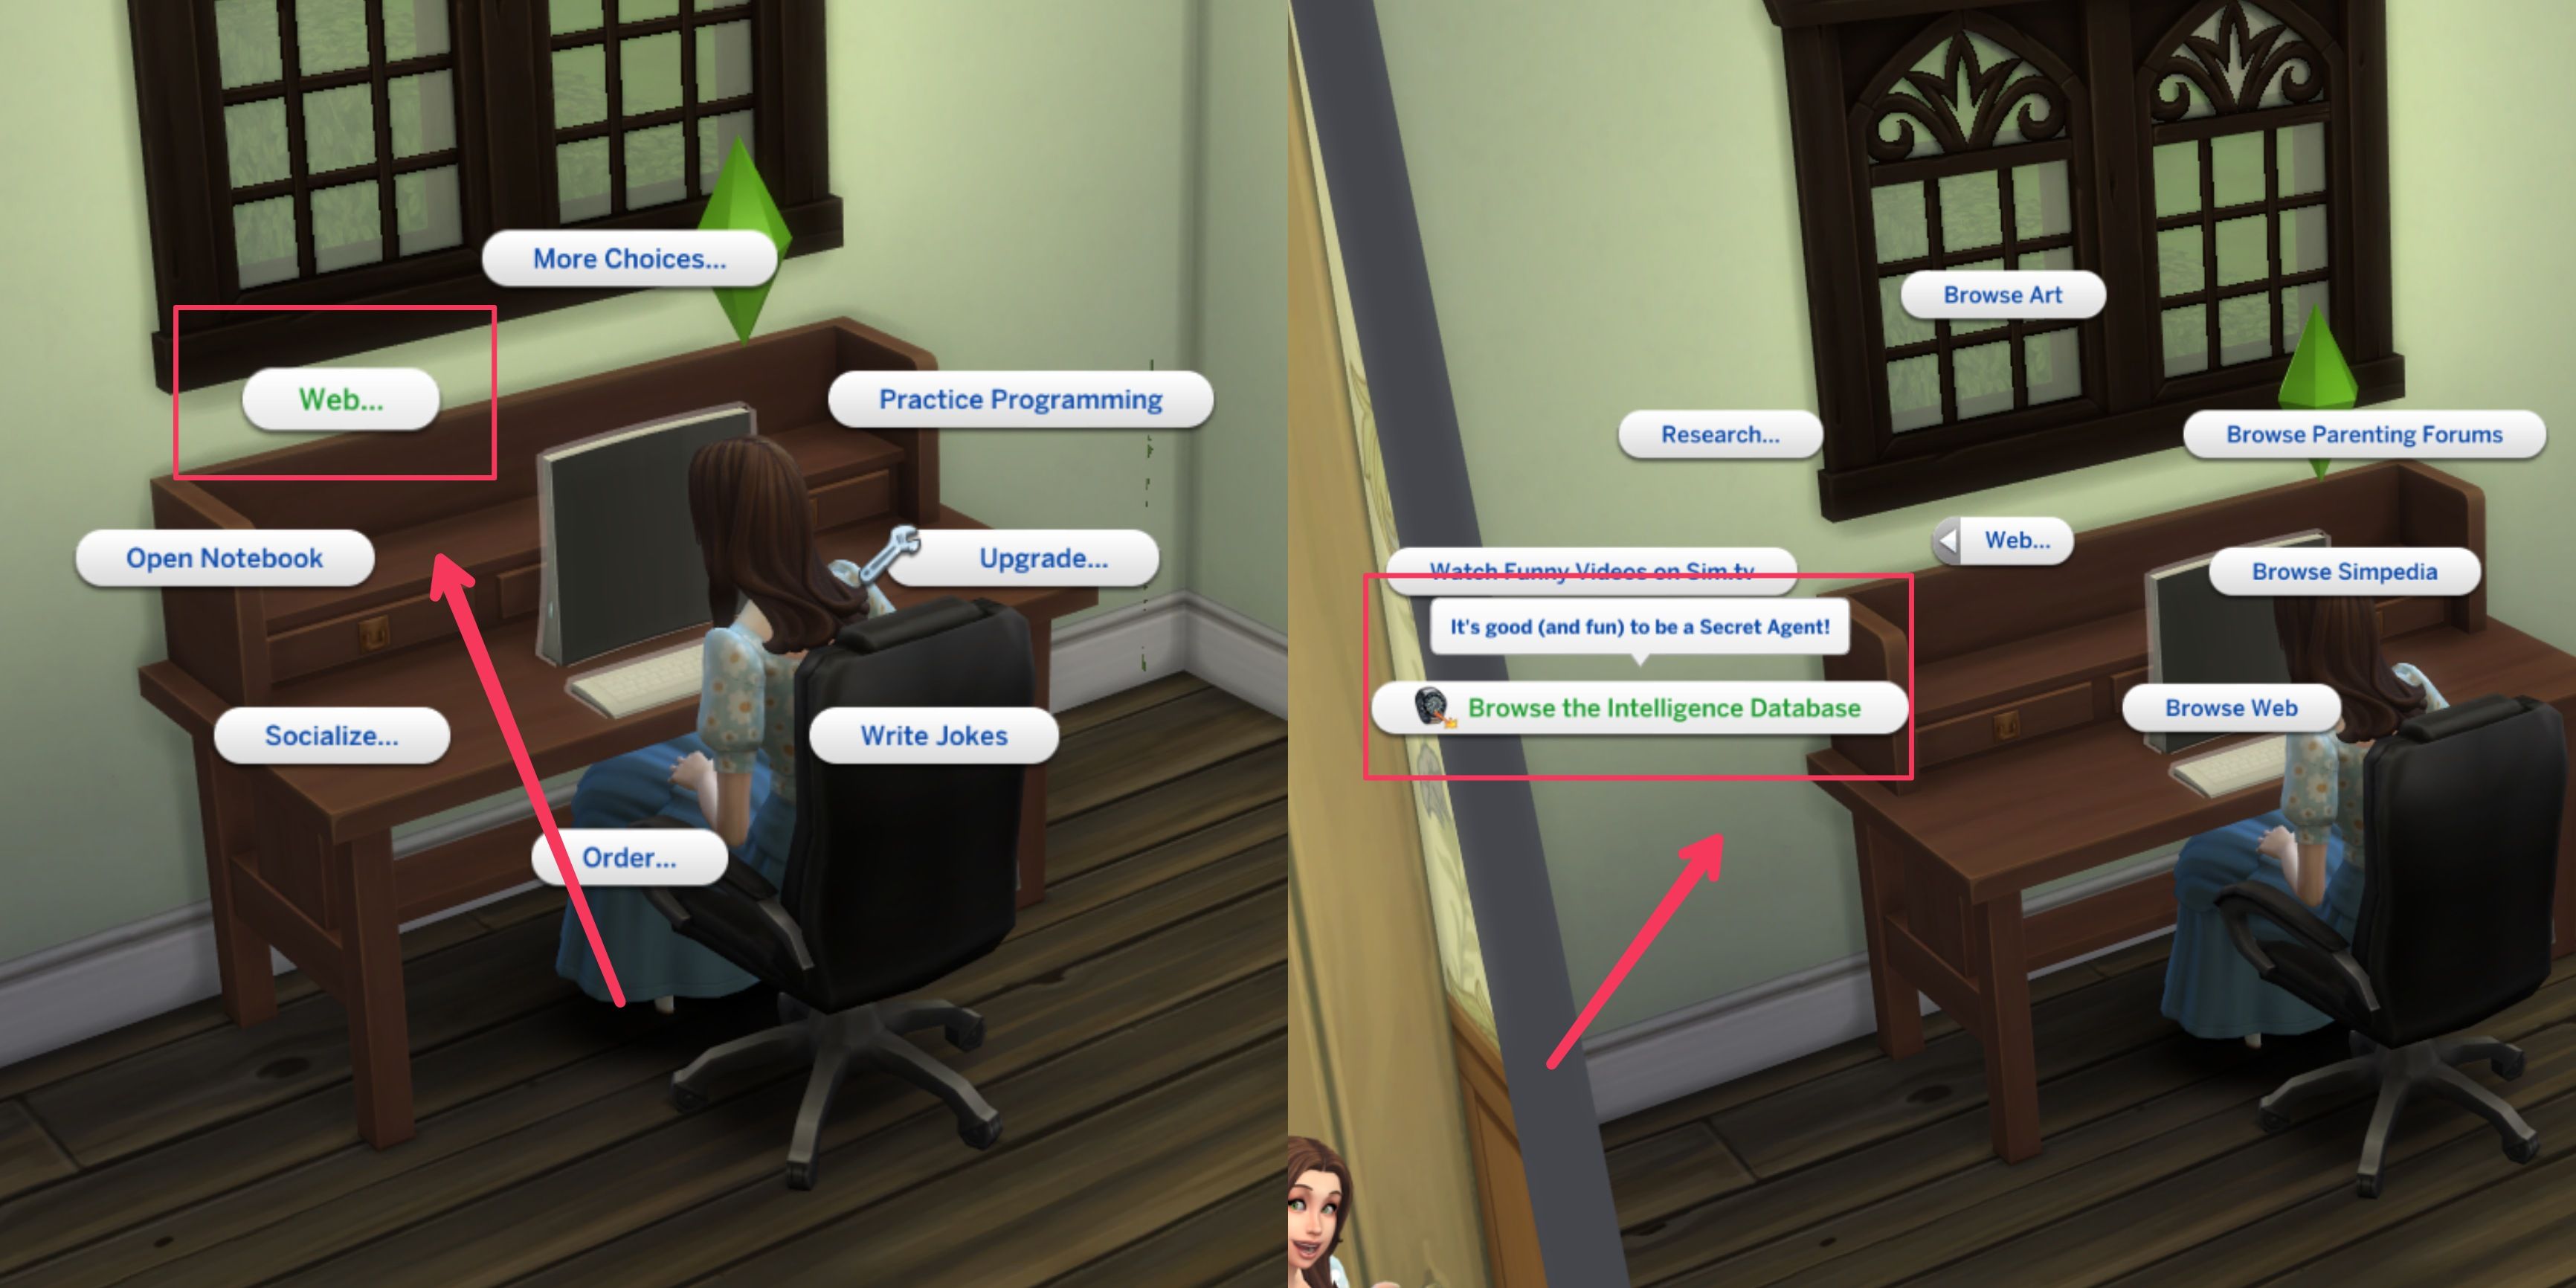 the web option and the browse intelligence database optionin the sims 4